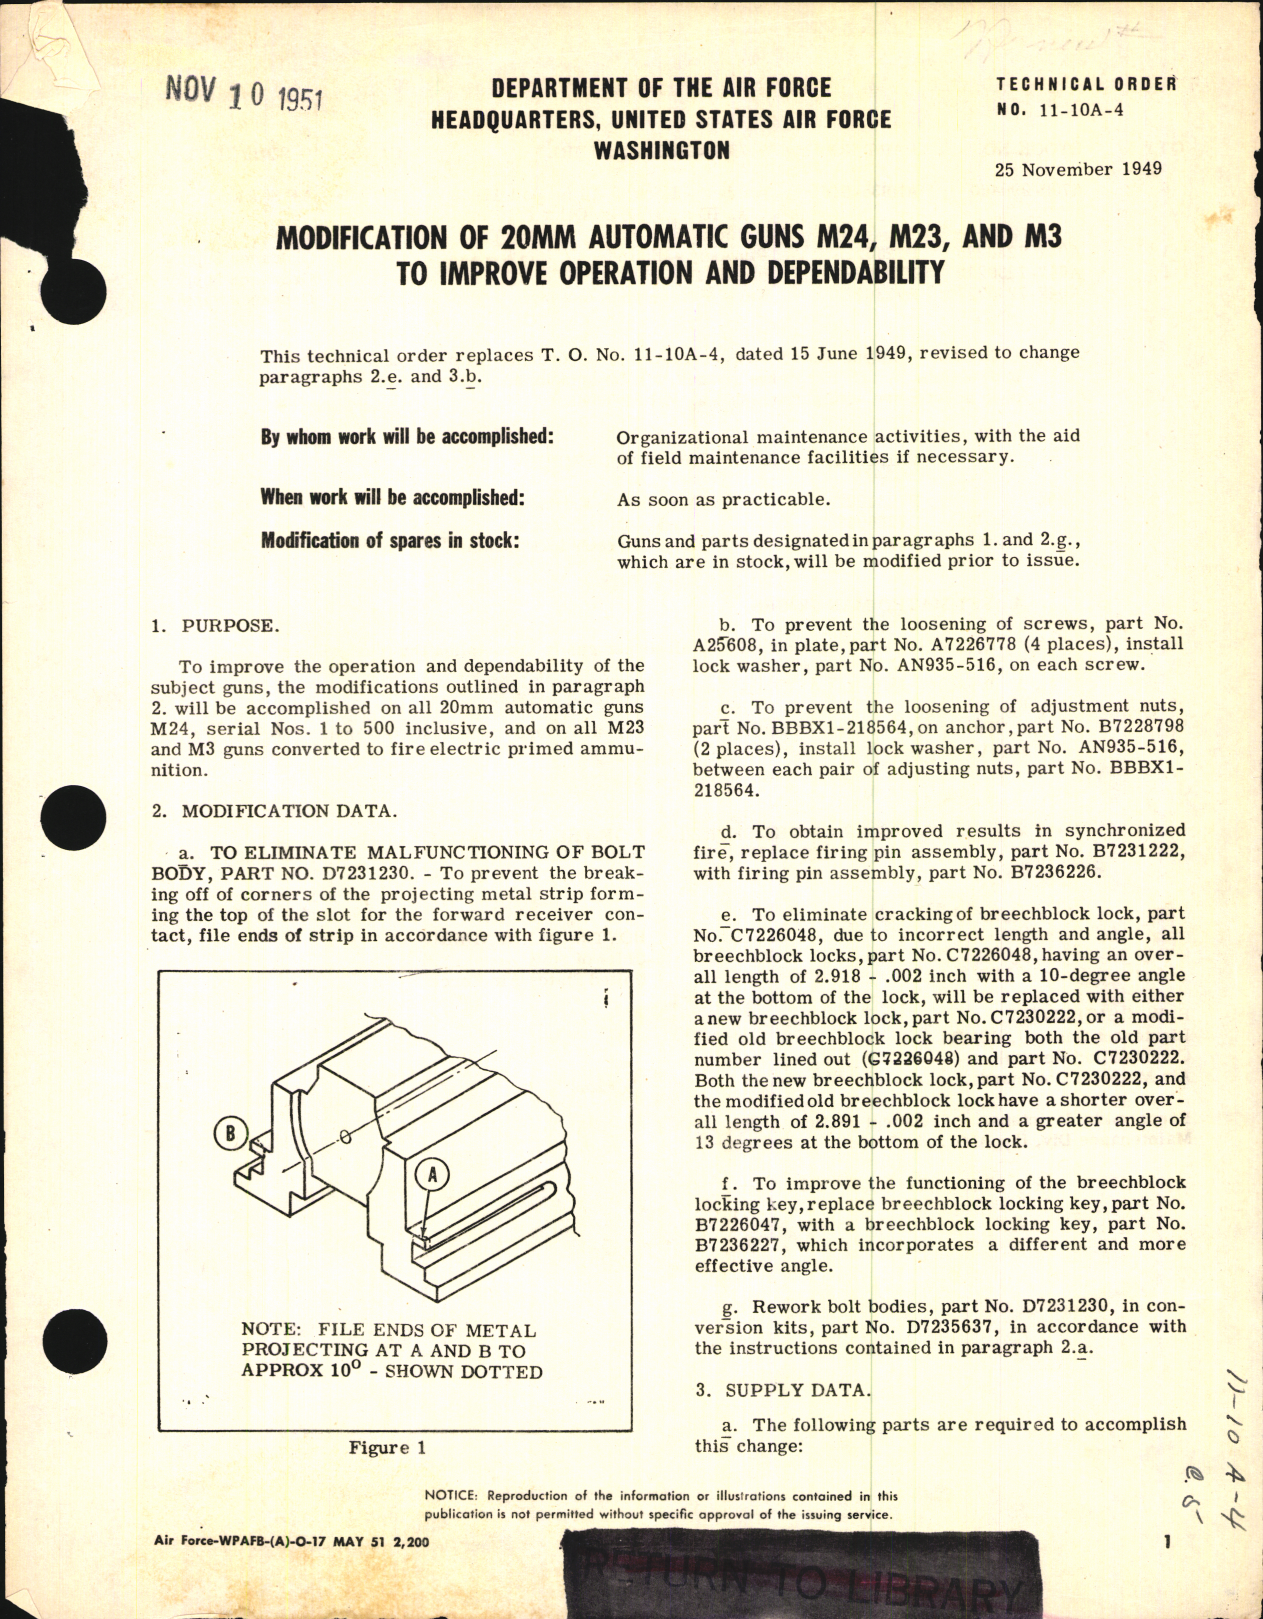 Sample page 1 from AirCorps Library document: Modification of 20MM Automatic Guns M24, M23, And M3 To Improve Operation & Dependability